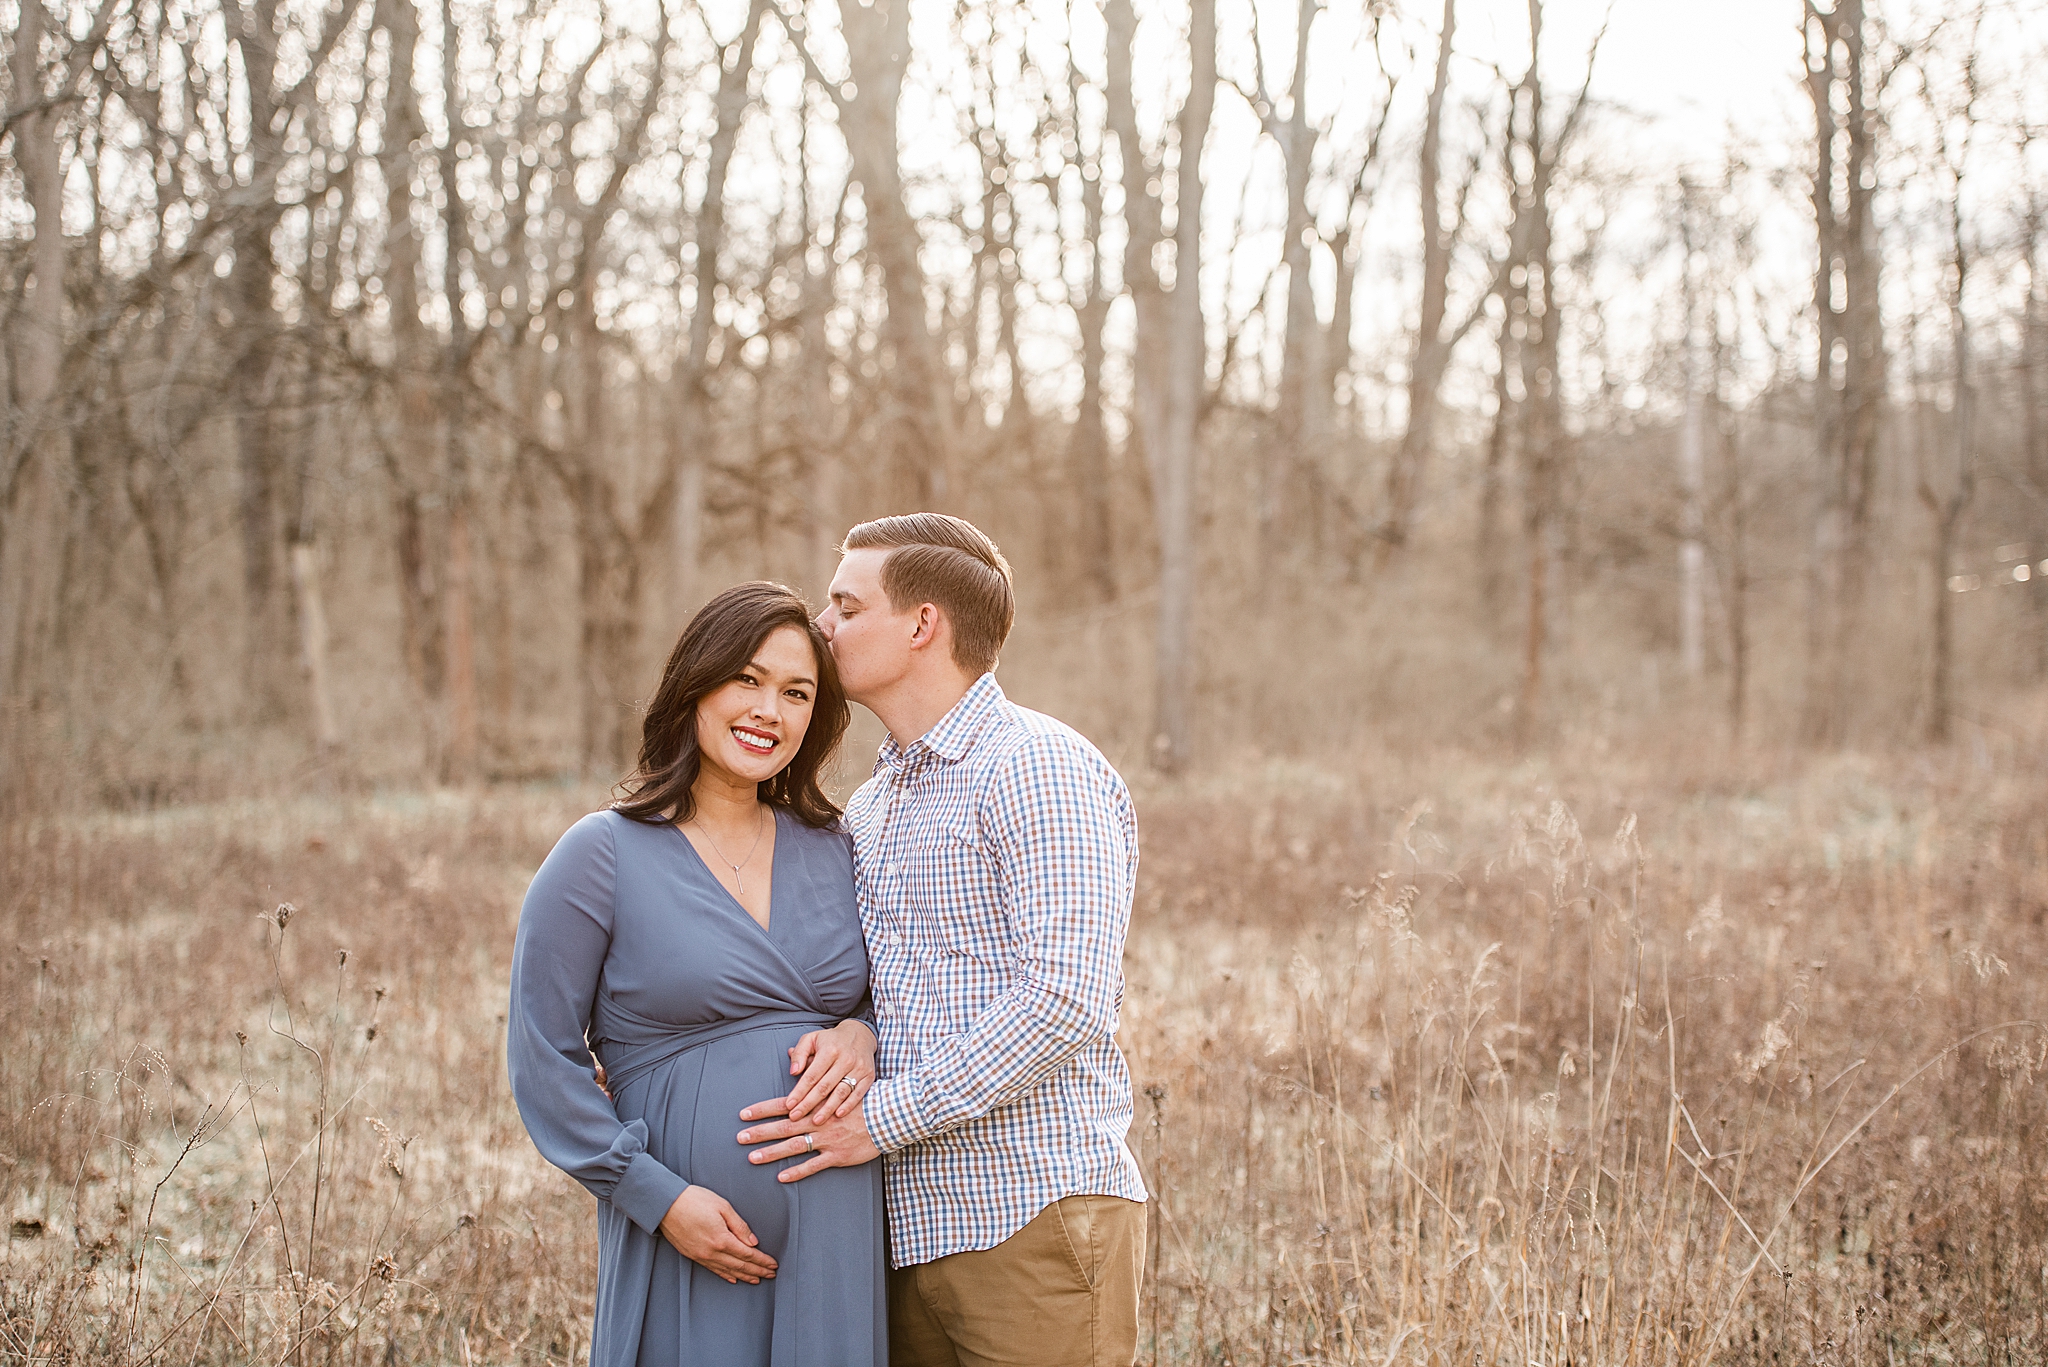 Centerville Maternity Photographer | Expecting Baby